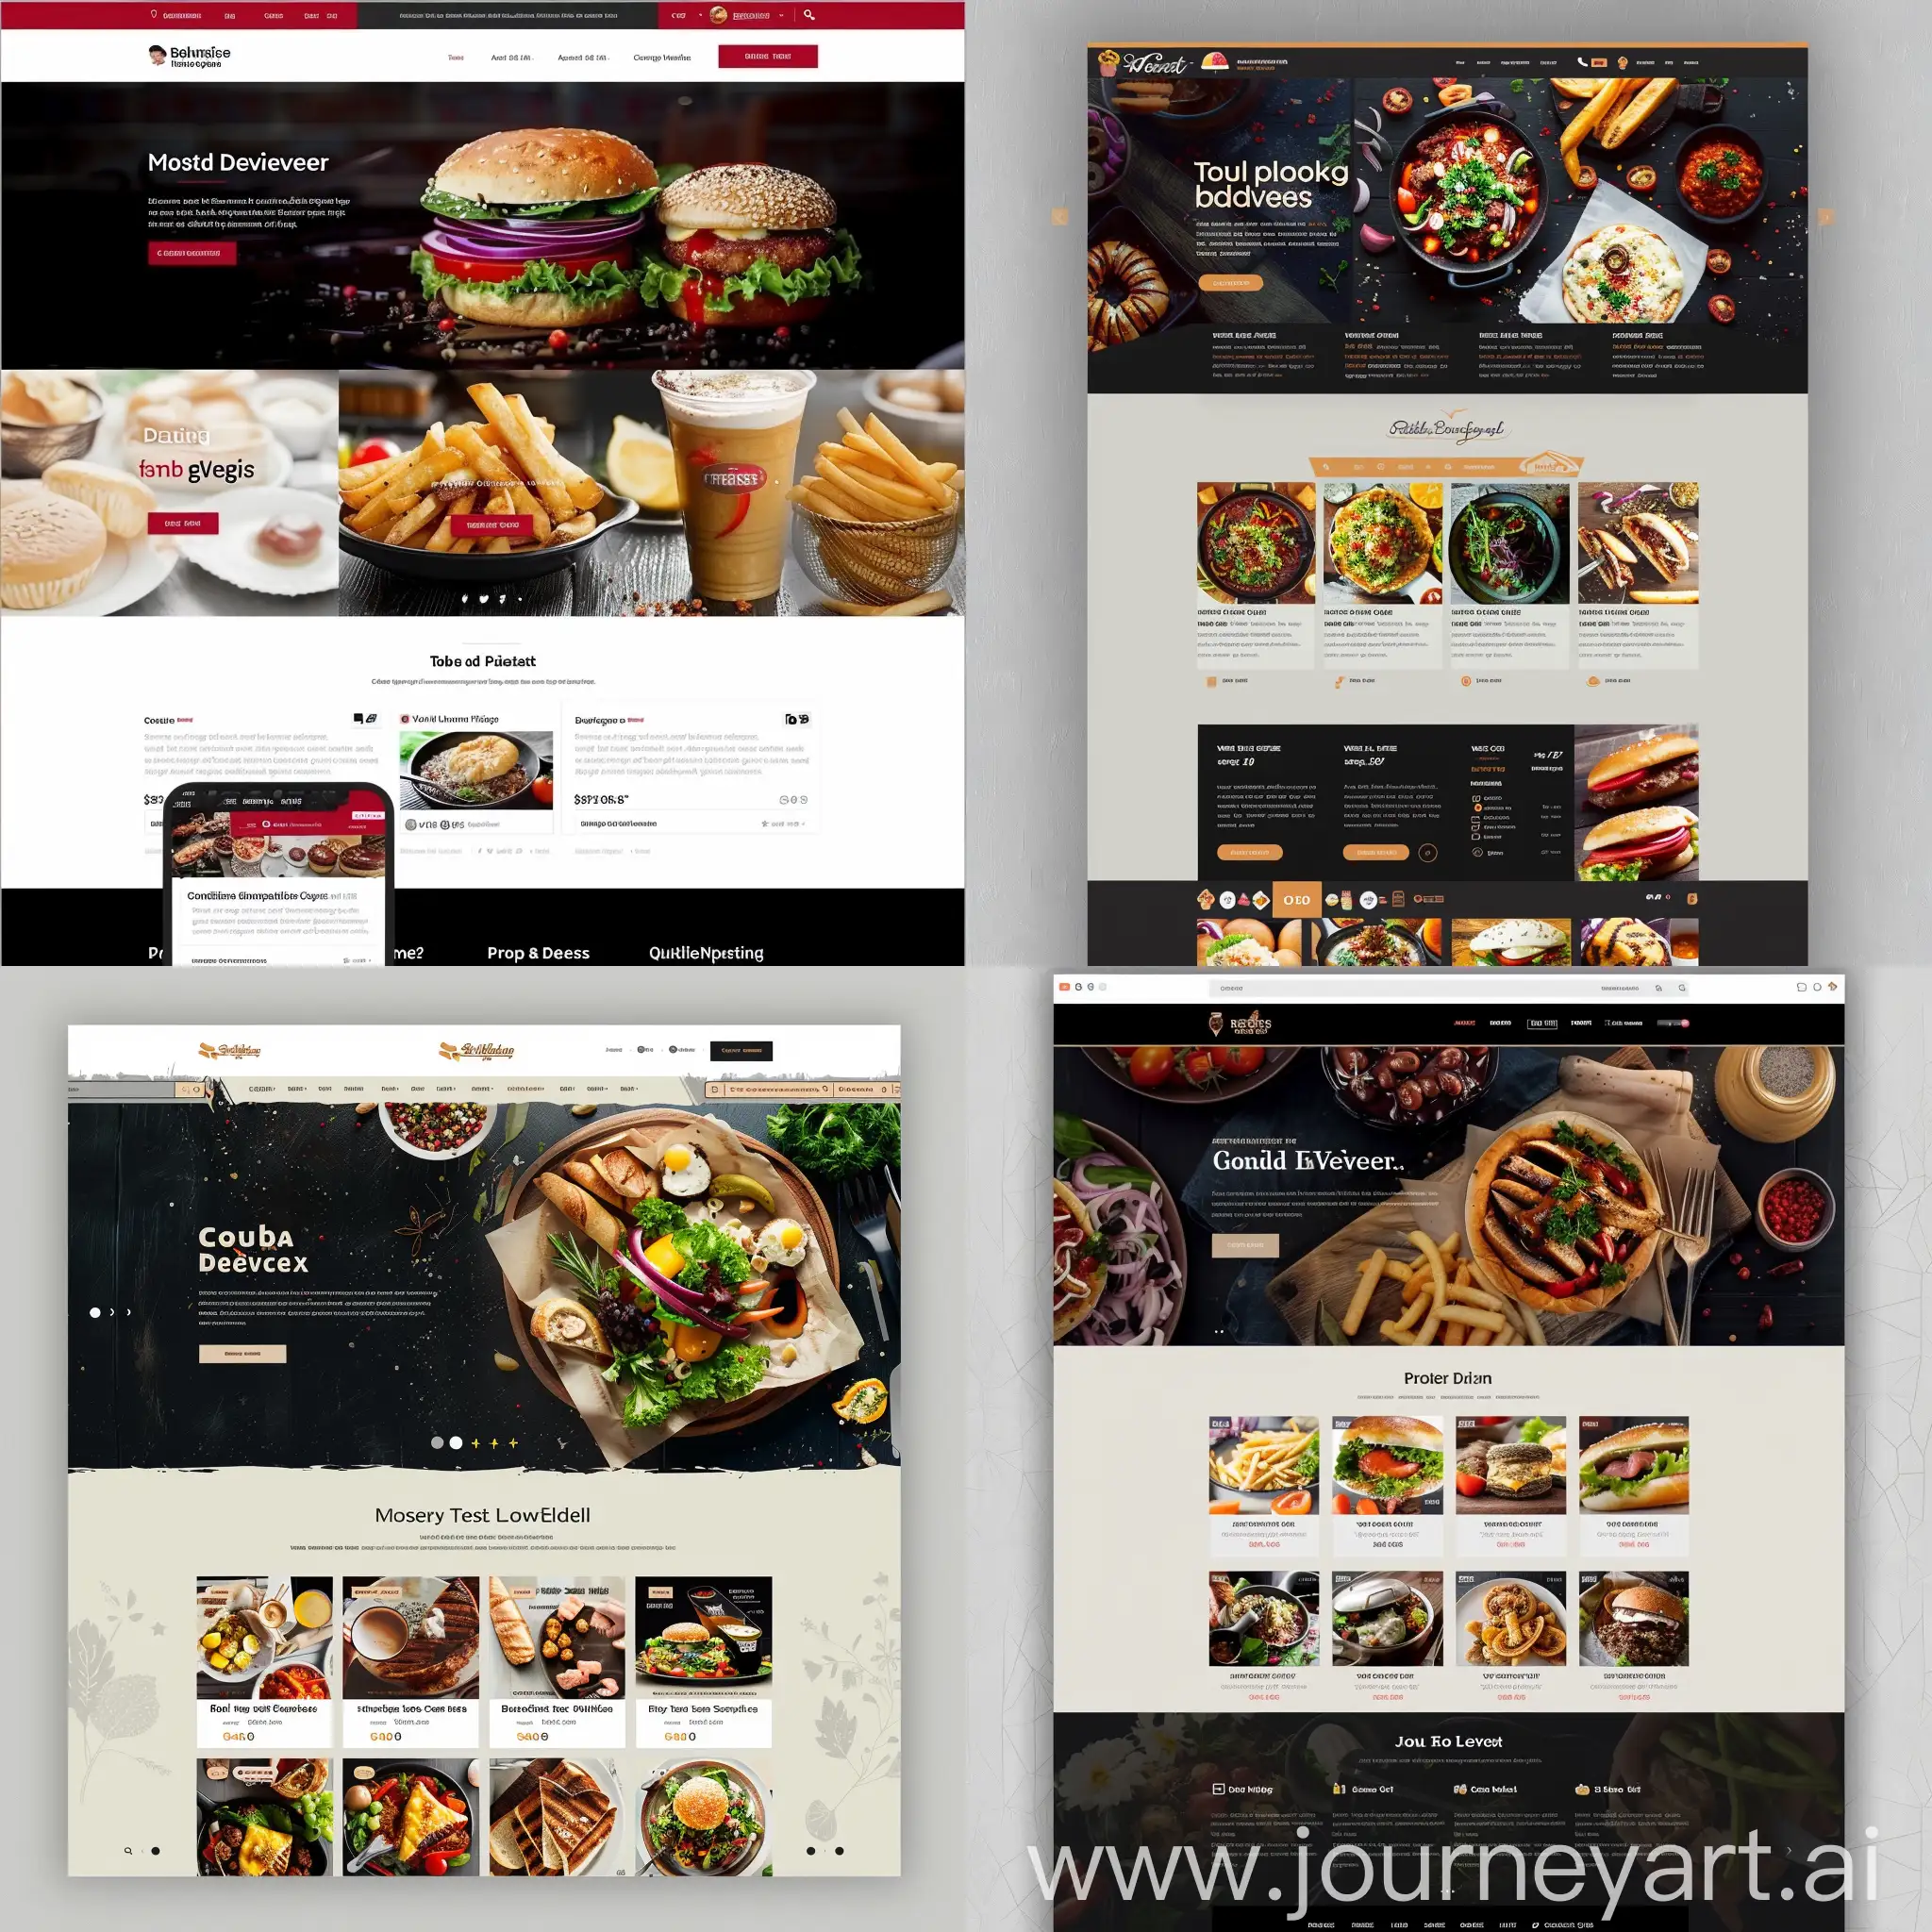 Modern-Food-Delivery-Website-Design-with-Elegant-Layout-and-Seamless-User-Experience